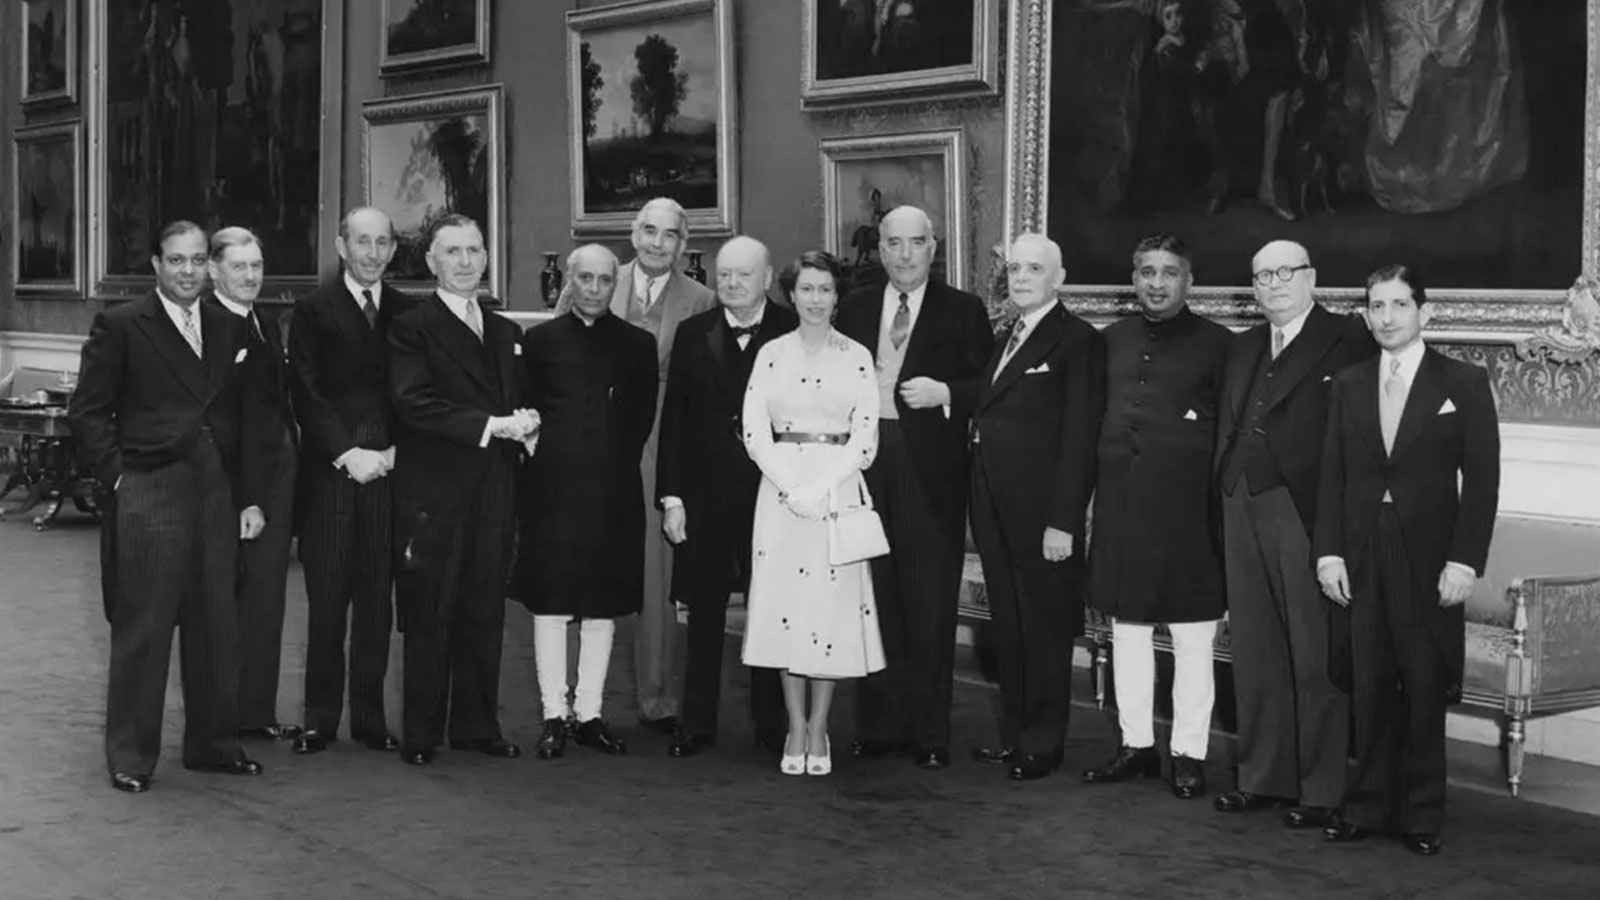 Queen Elizabeth II with representatives of the Commonwealth in 1953. As head of state, she put a stolid traditionalist front over decades of violent upheaval.